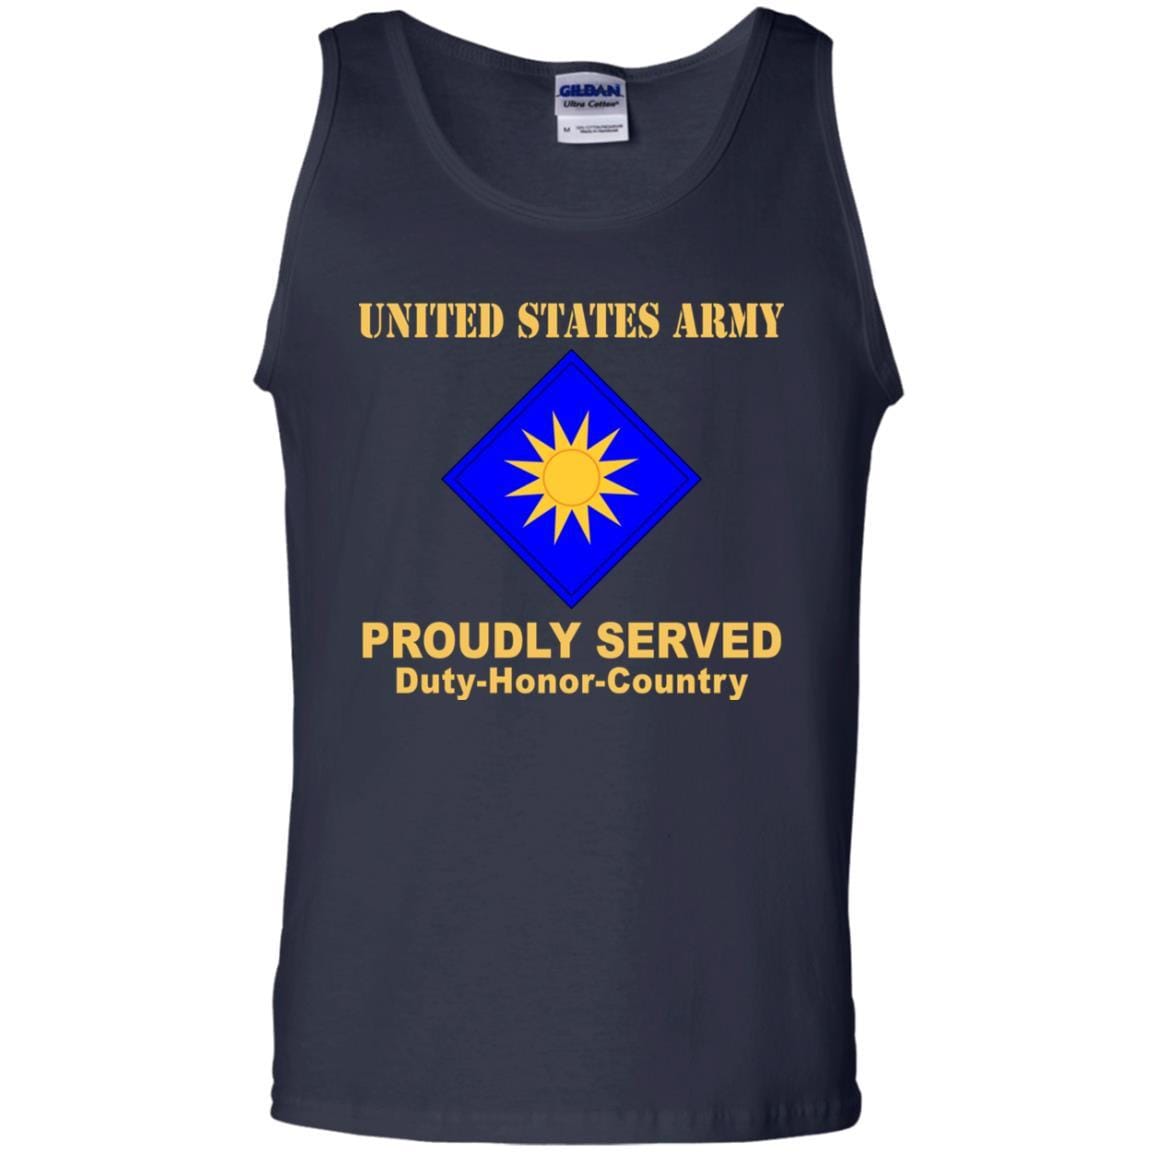 US ARMY 40TH INFANTRY DIVISION- Proudly Served T-Shirt On Front For Men-TShirt-Army-Veterans Nation